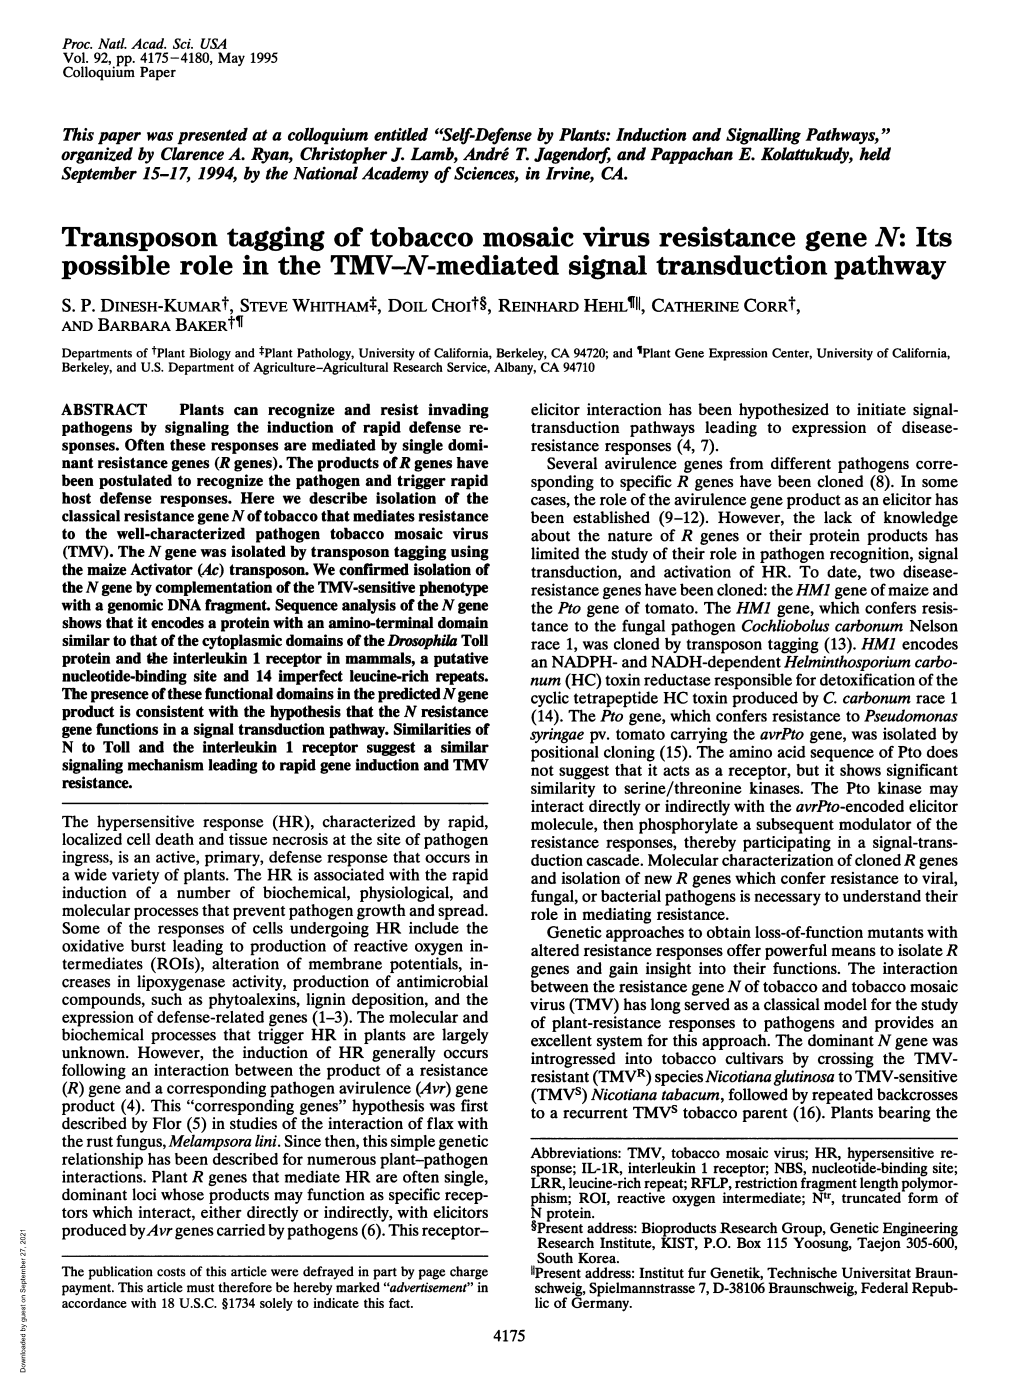 Transposon Tagging of Tobacco Mosaic Virus Resistance Gene N: Its Possible Role in the TMV-N-Mediated Signal Transduction Pathway S